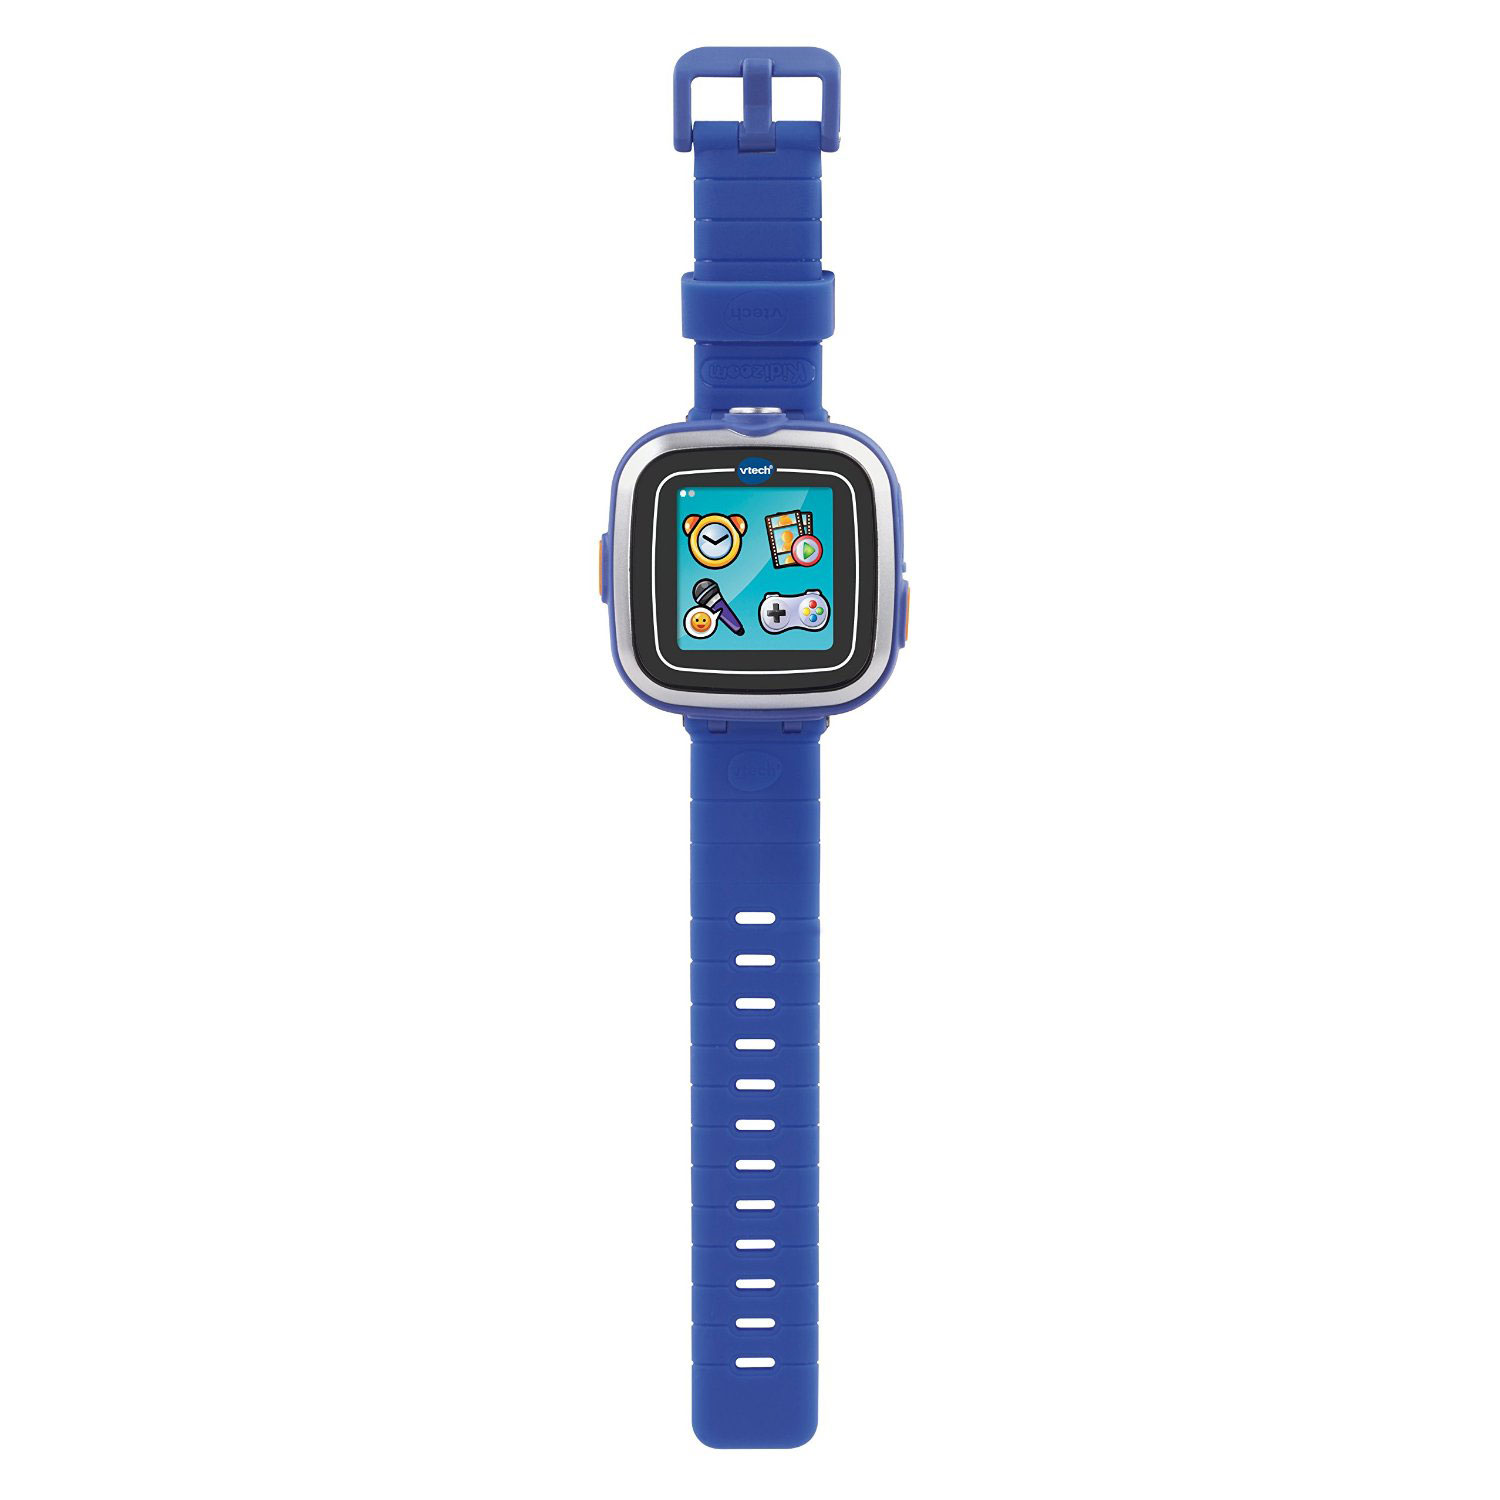 learning lodge vtech watch games